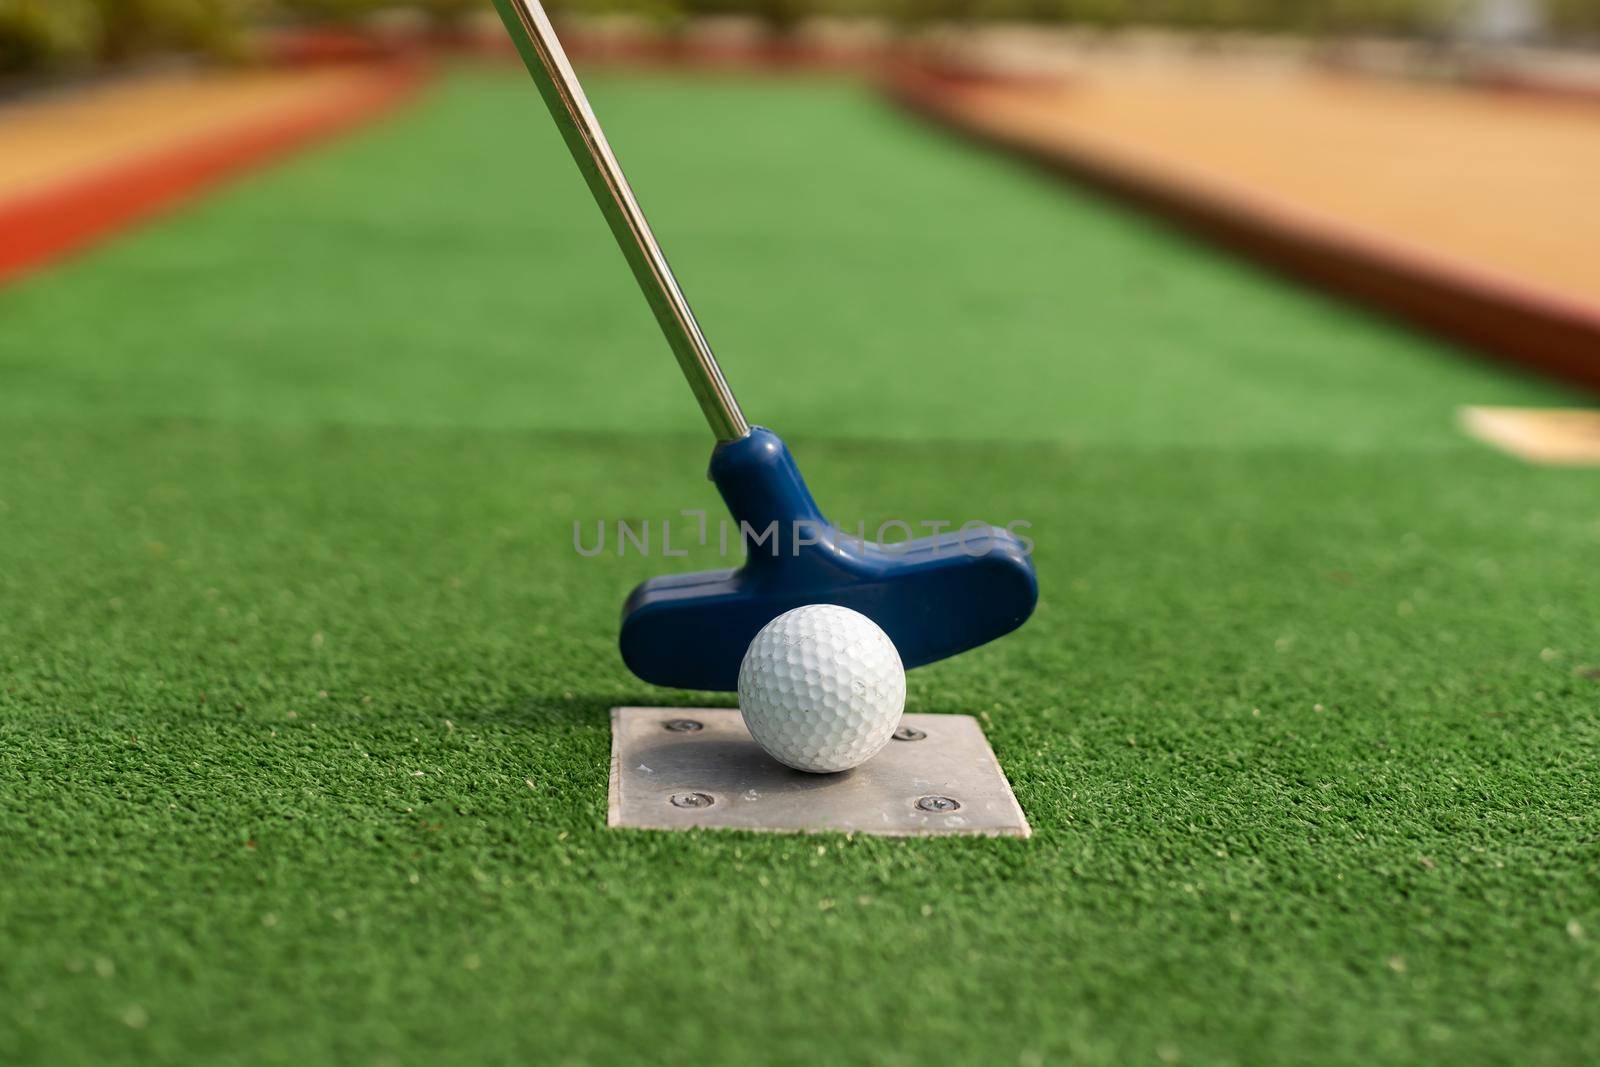 A club prepares to hit a ball during a mini golf game by Andelov13